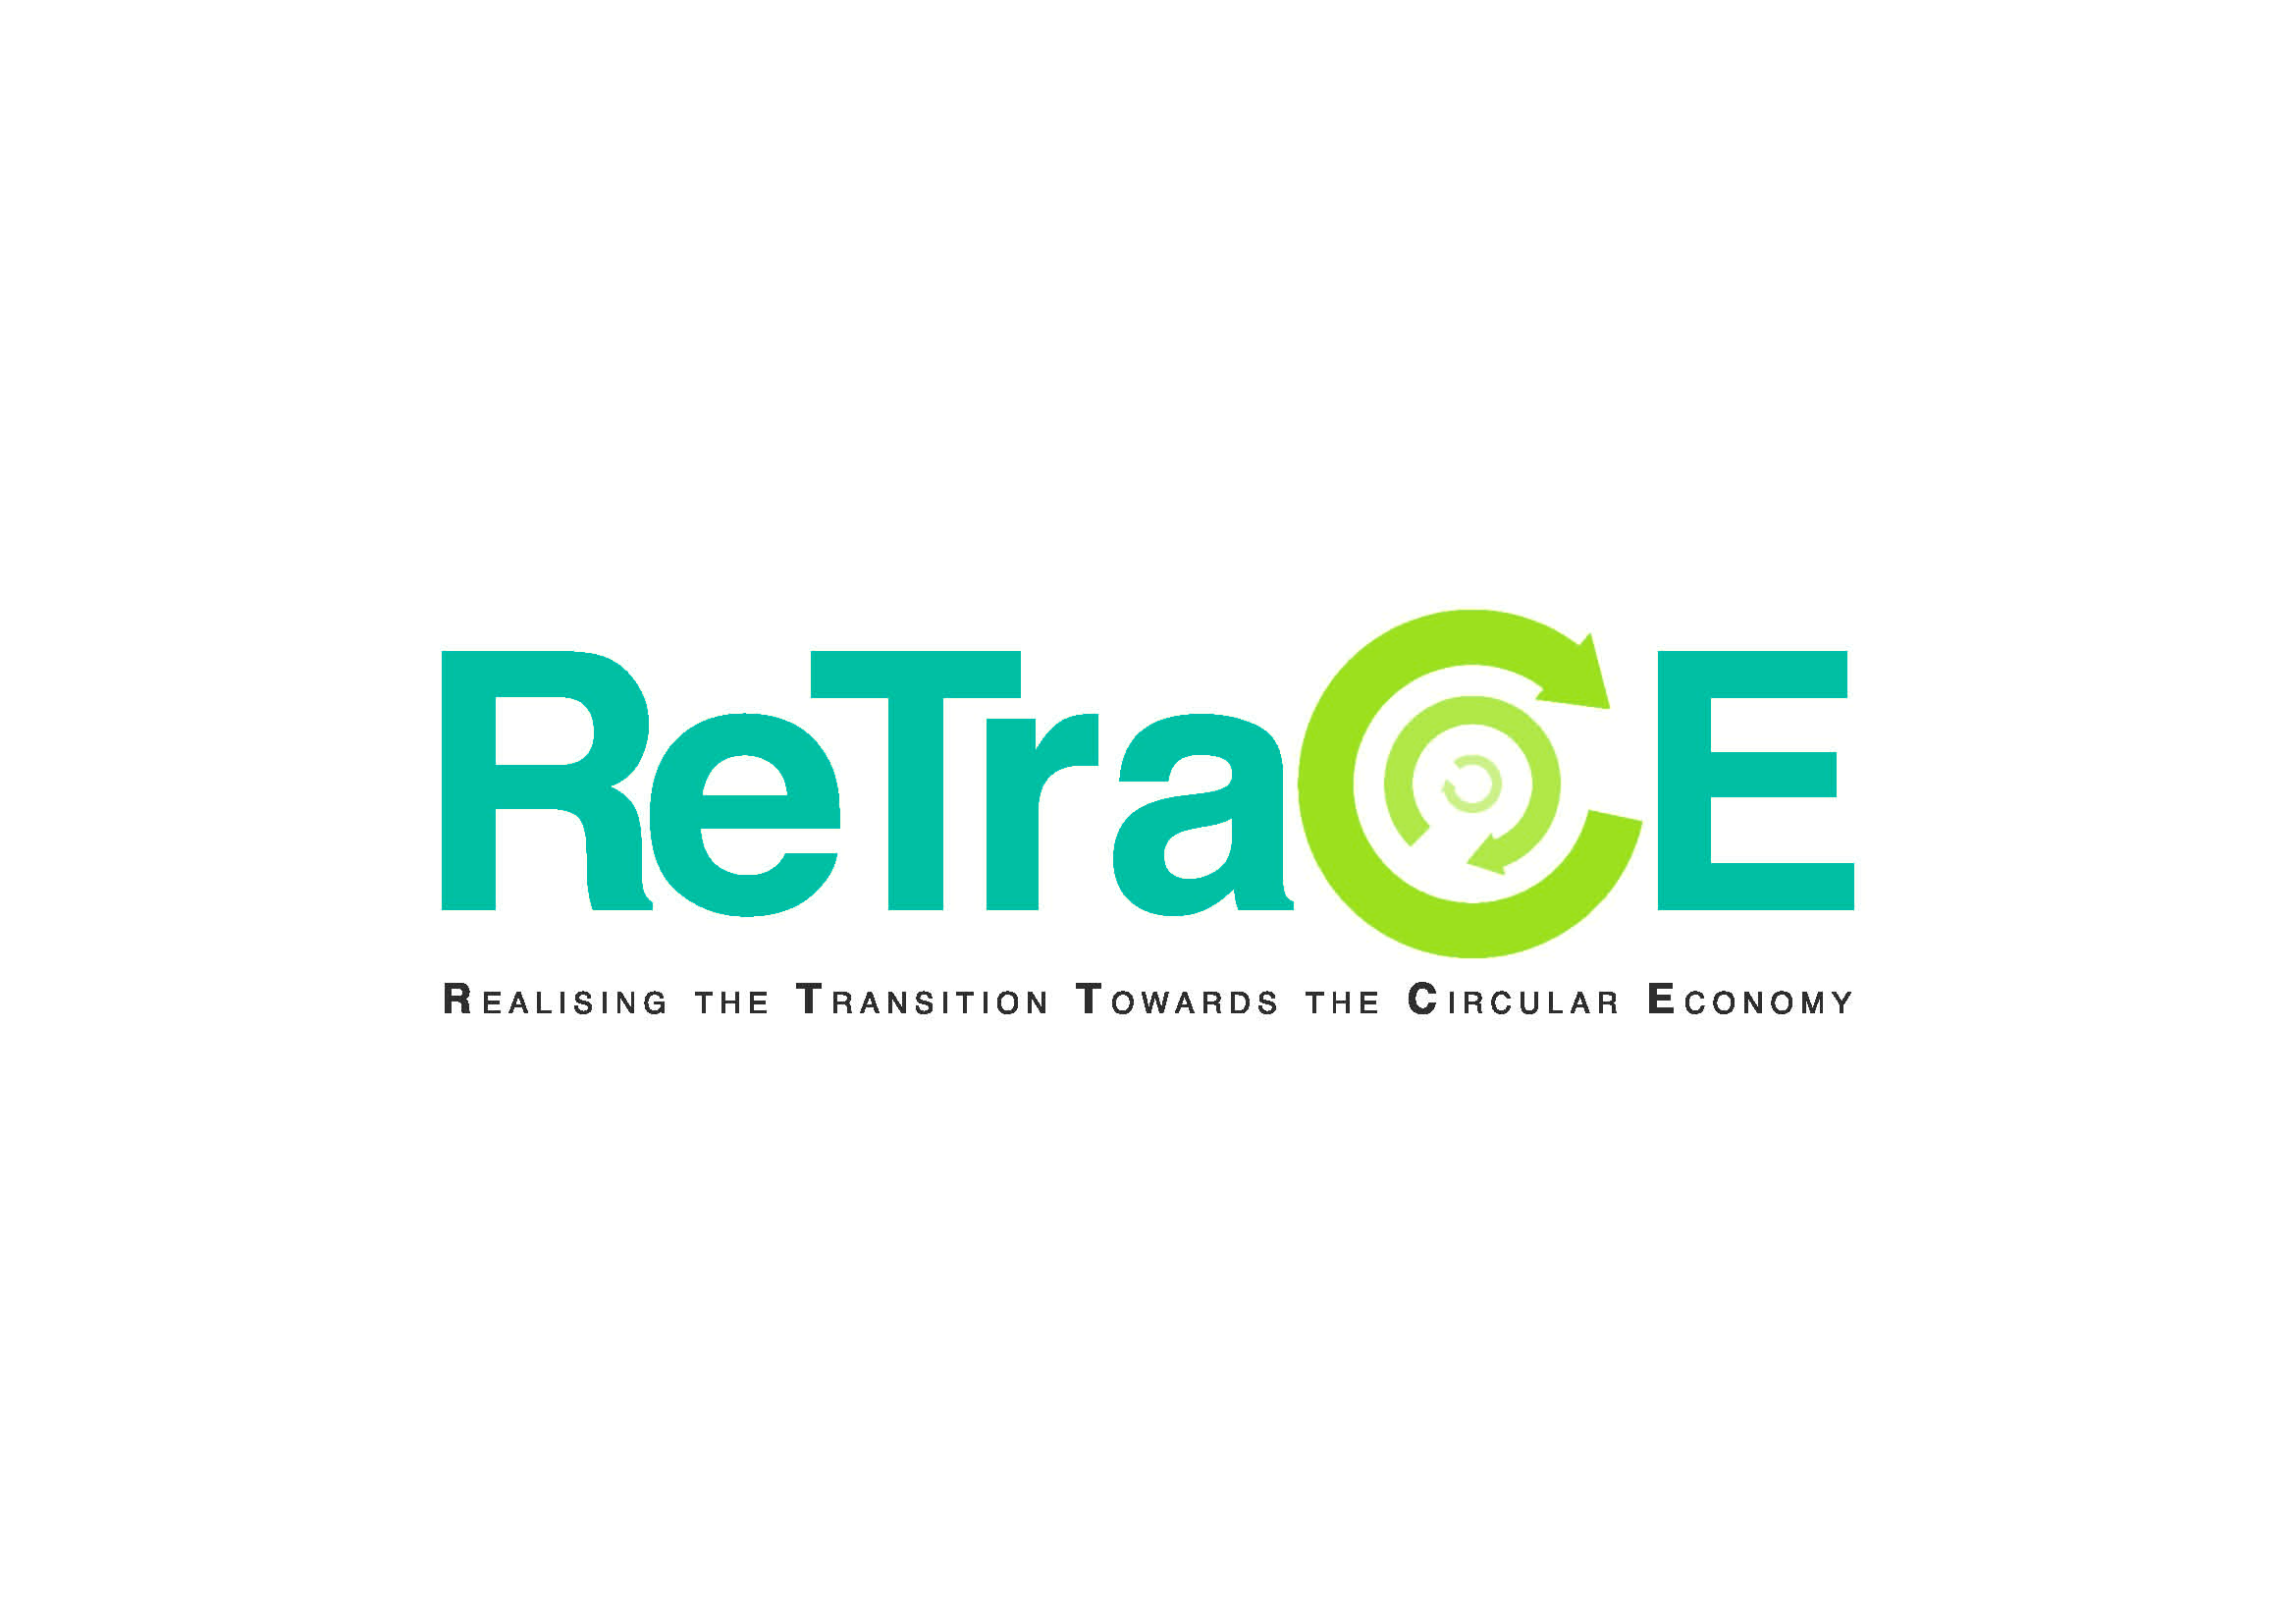 Realising the Transition to the Circular Economy (ReTraCE) project / PhD Studies at the South East European Research Centre (SEERC): Call for Applications (Submission Deadline: January 15, 2019)